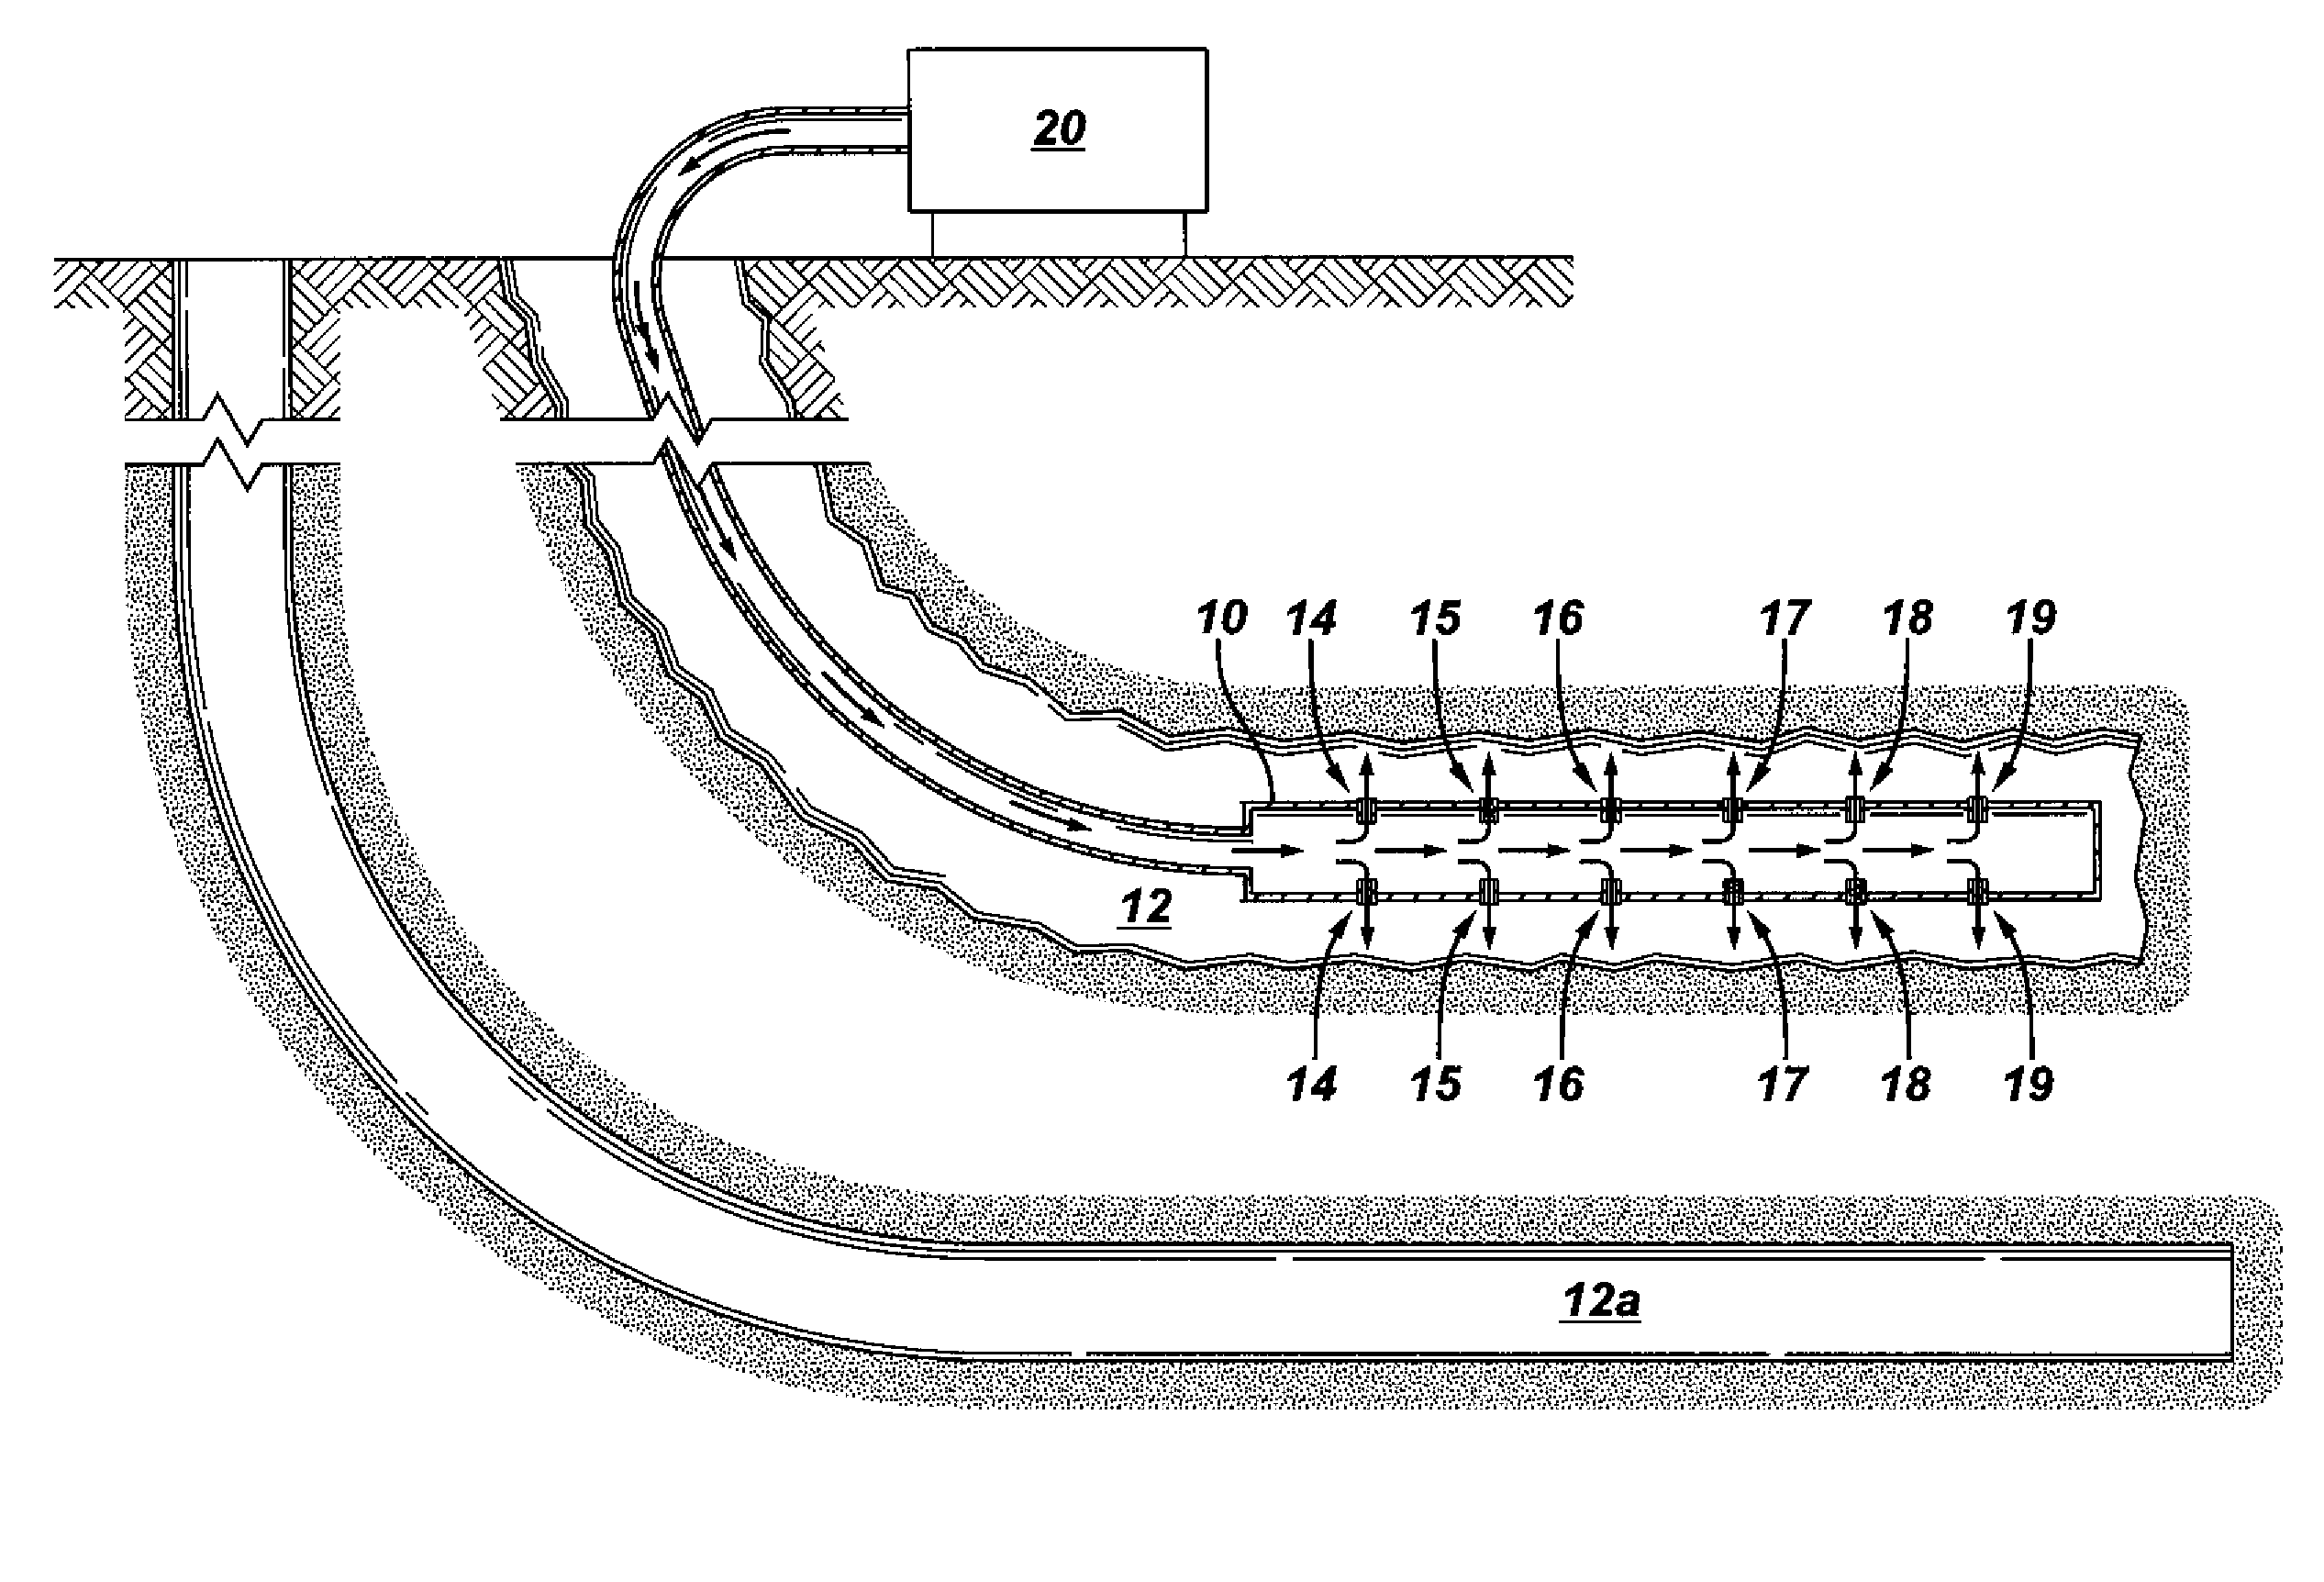 Steam injection apparatus for steam assisted gravity drainage techniques